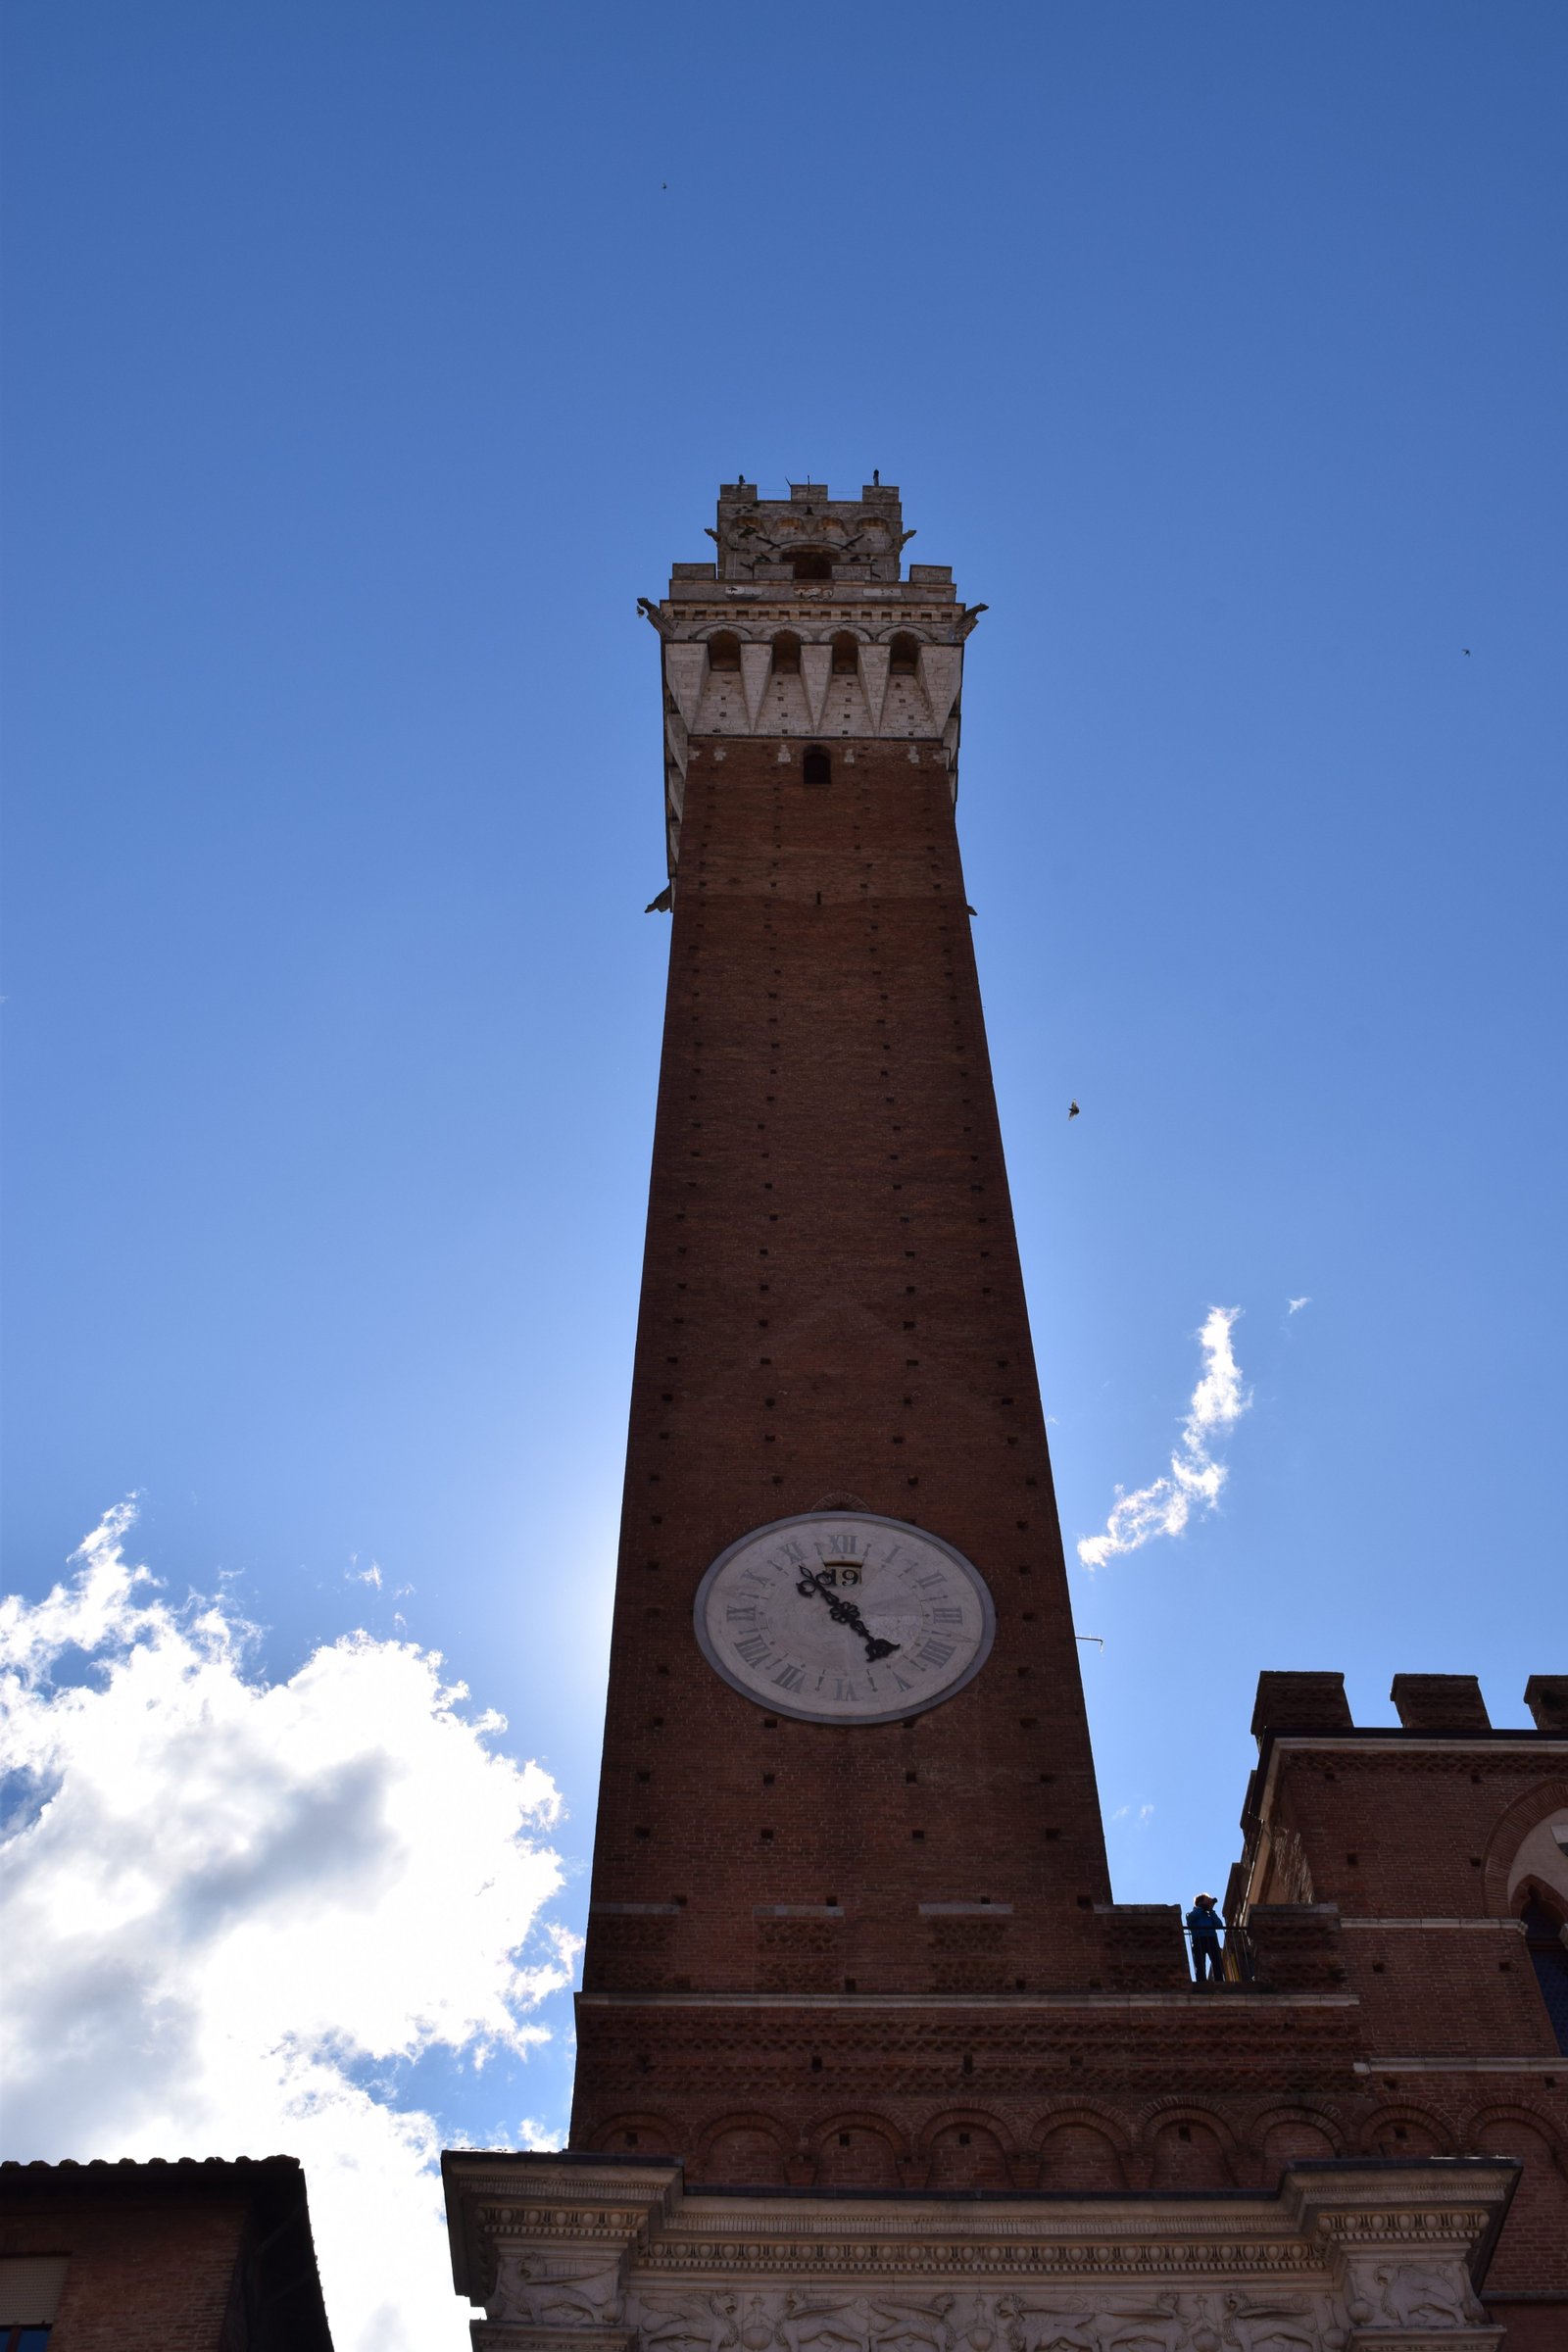 The tower in Siena, Italy. ouritalianjourney.com